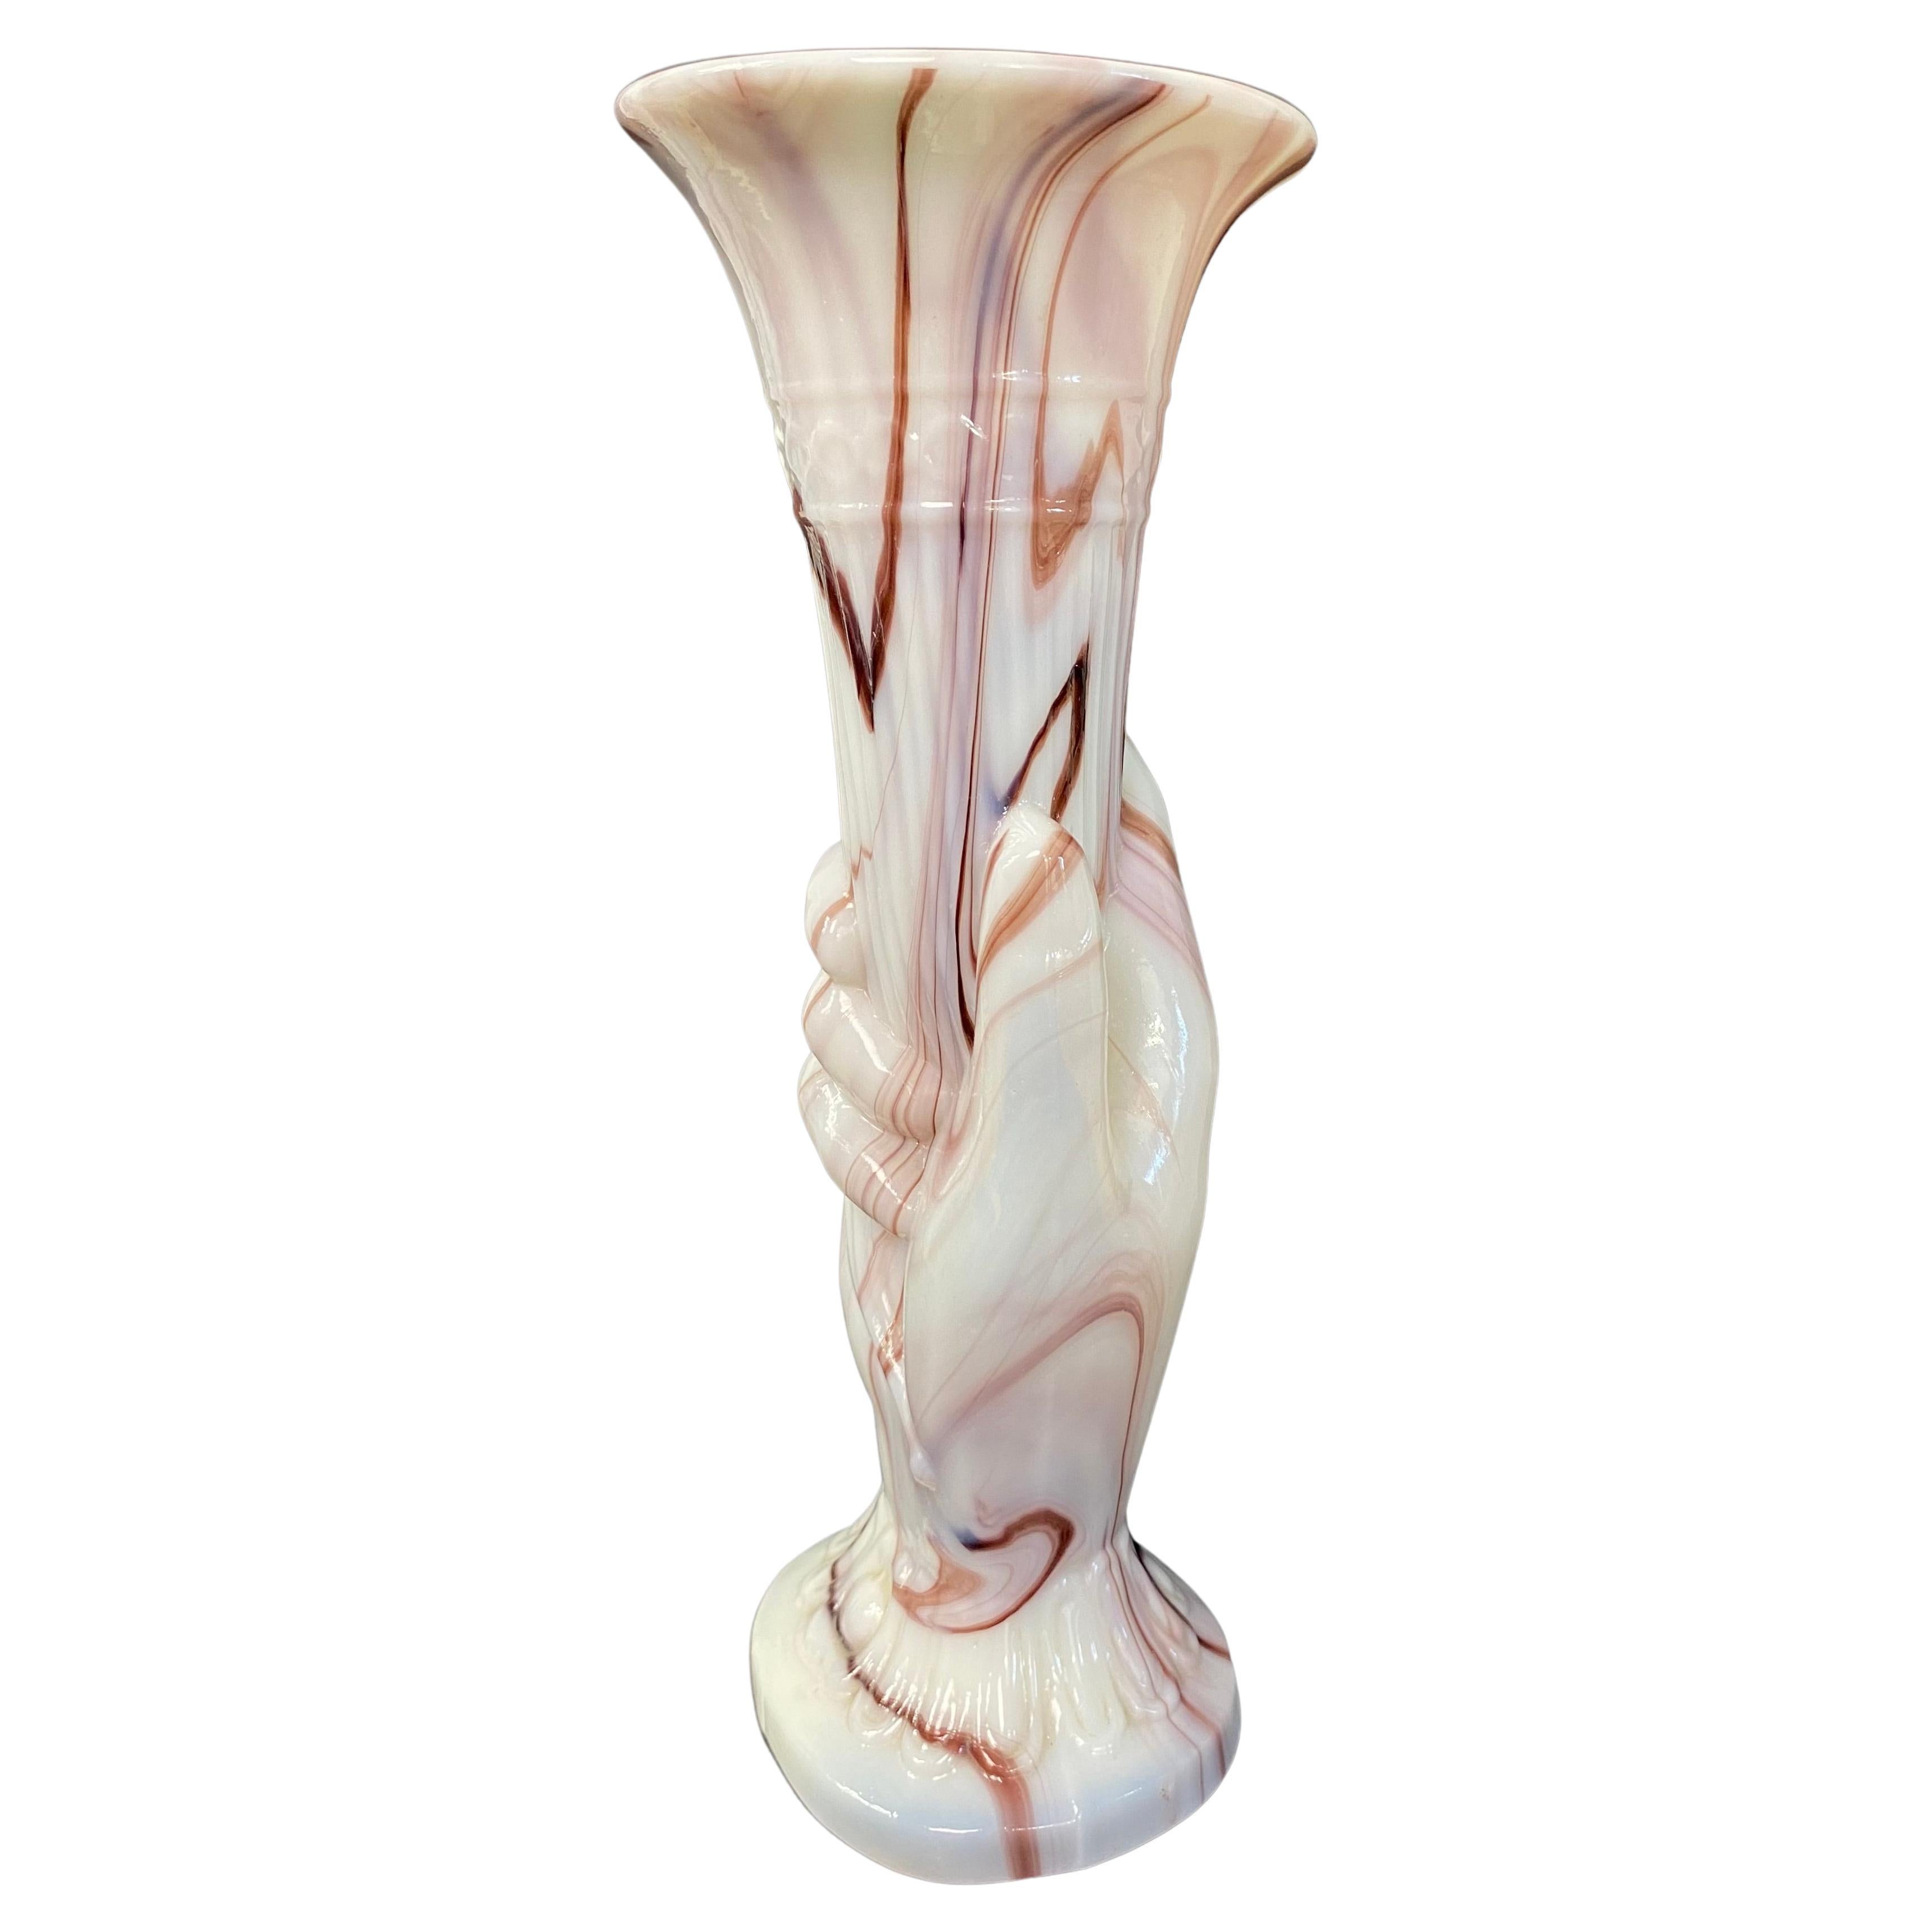 Blown white and brown opaline vase from the Portieux Vallerysthal crystal factory representing a hand holding a cornucopia and dating approximately from the 1920s
“Cornet” vase or “Main” vase
The ring finger wears a ring and the base represents the